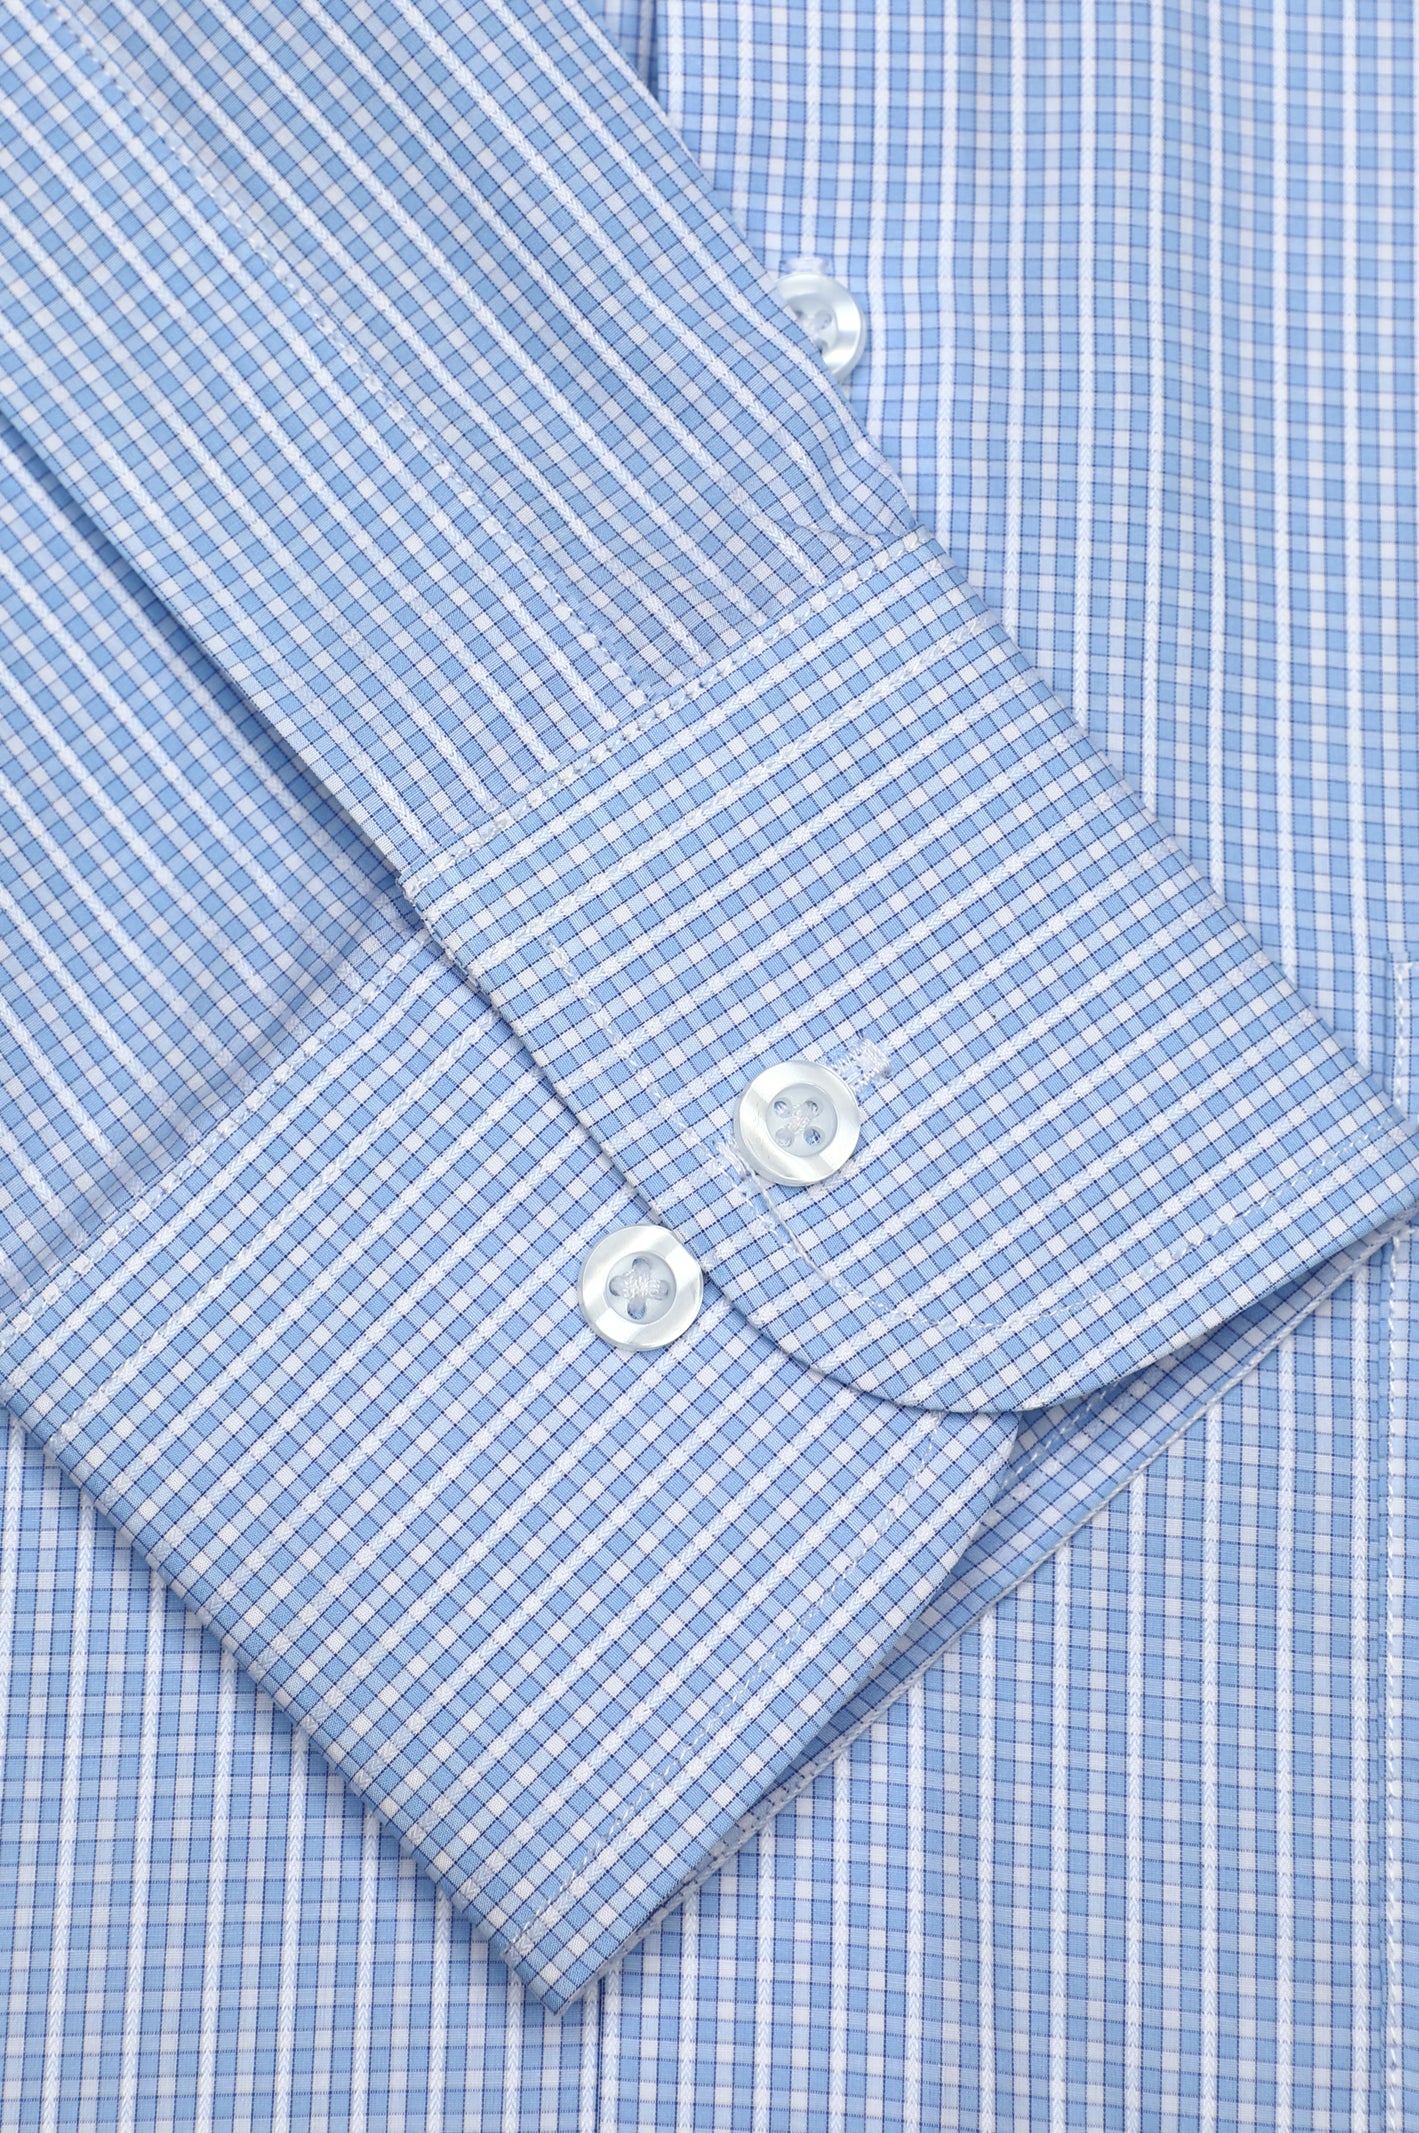 Light Blue Mini-Check Formal Autograph Shirt From Diners